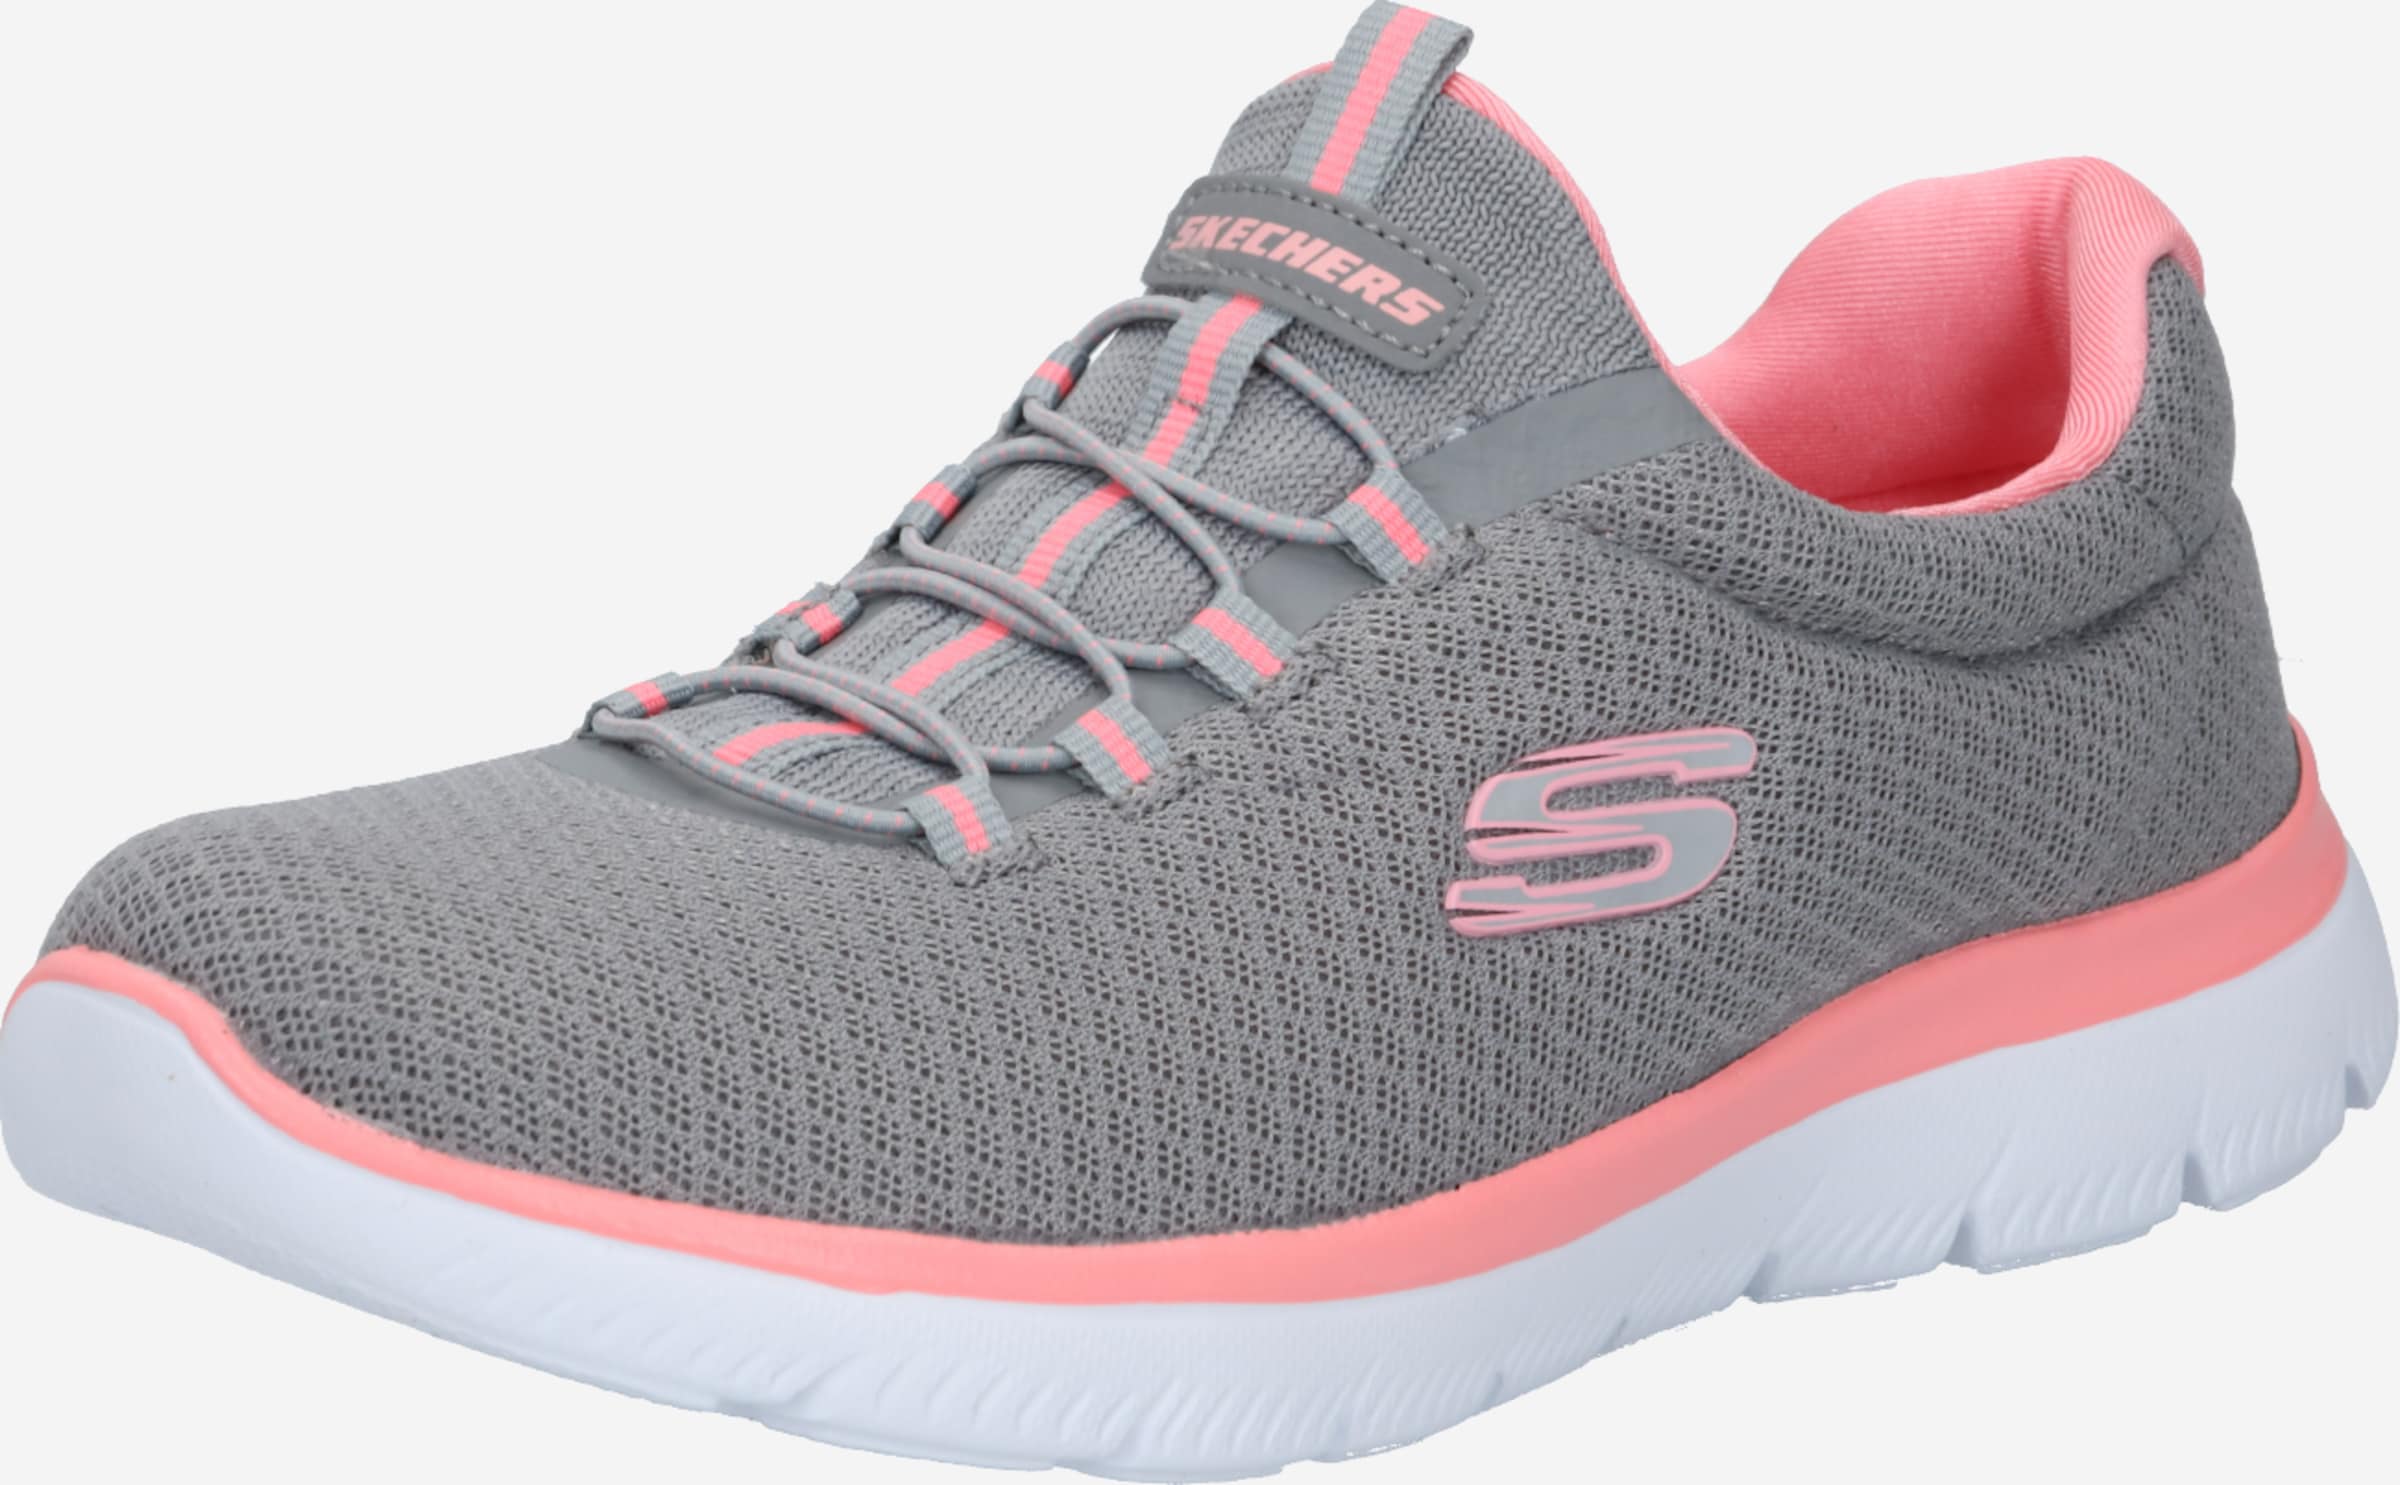 SKECHERS Slip-Ons 'Summits' Grey | ABOUT YOU